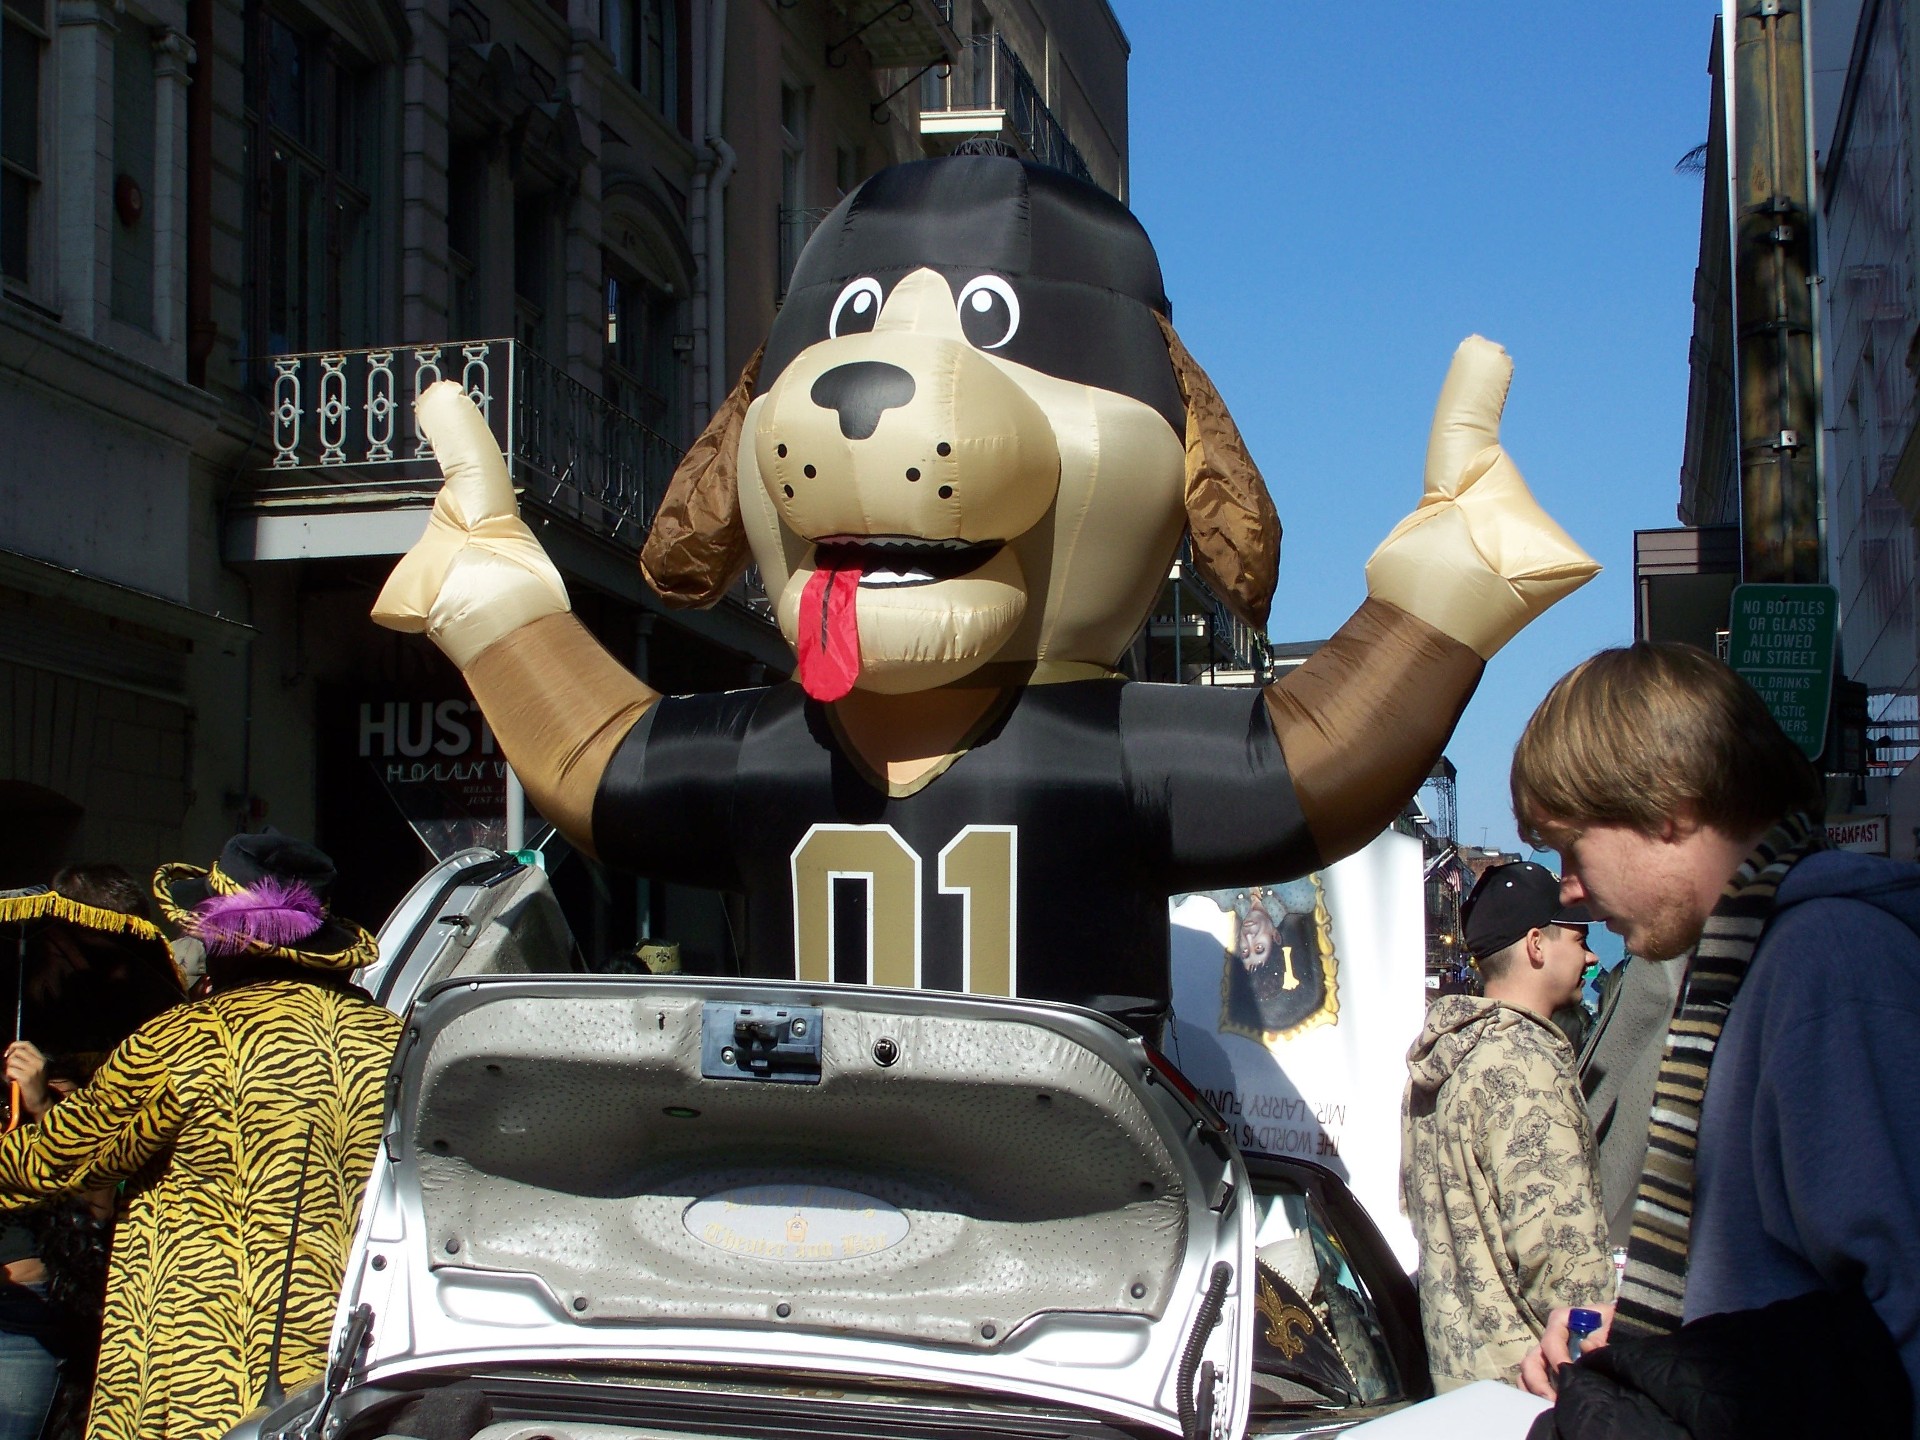 a dog float in a parade down the street